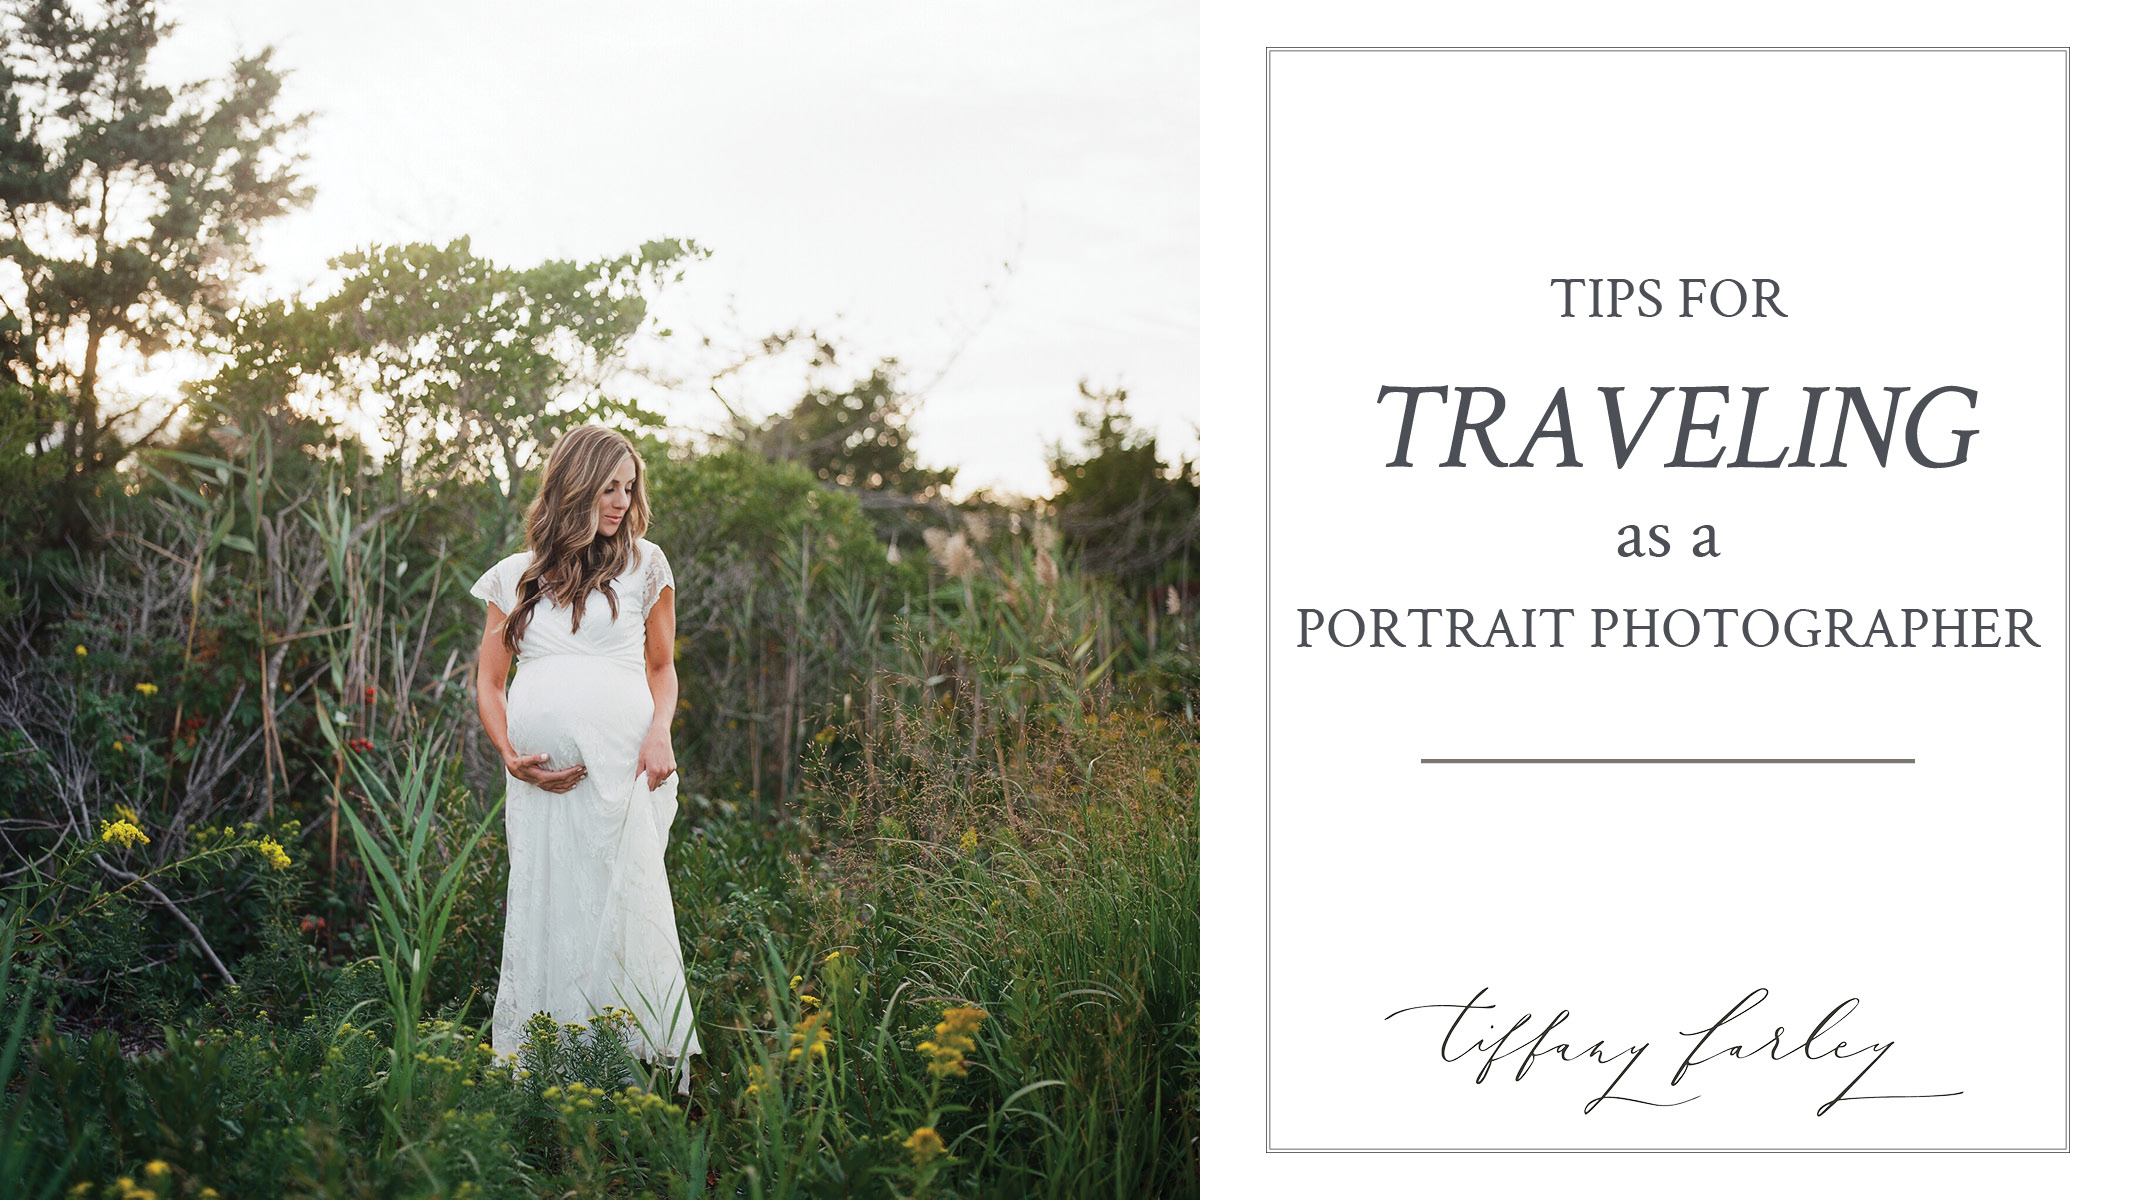 Tips for Traveling as a Portrait Photographer, Tiffany Farley